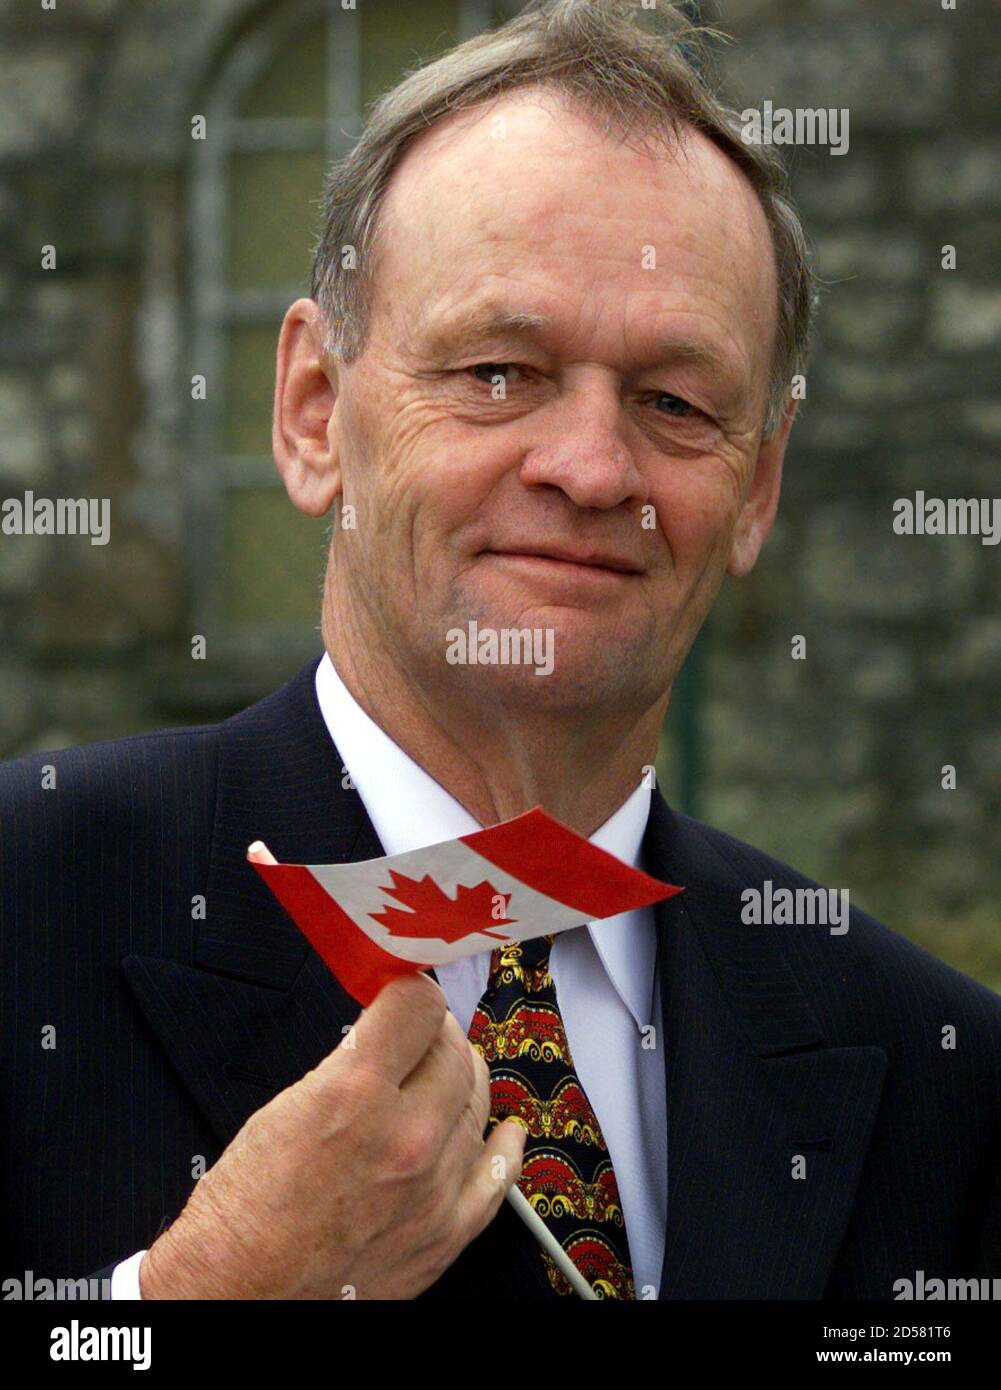 Canadian Prime Minister Jean Chretien waves a Canadian flag after  inaugurating the 'Canada Room' at the Glencree Centre for Reconciliation in  Co. Wicklow, June 14. Chretien met the Irish Prime Minister Bertie